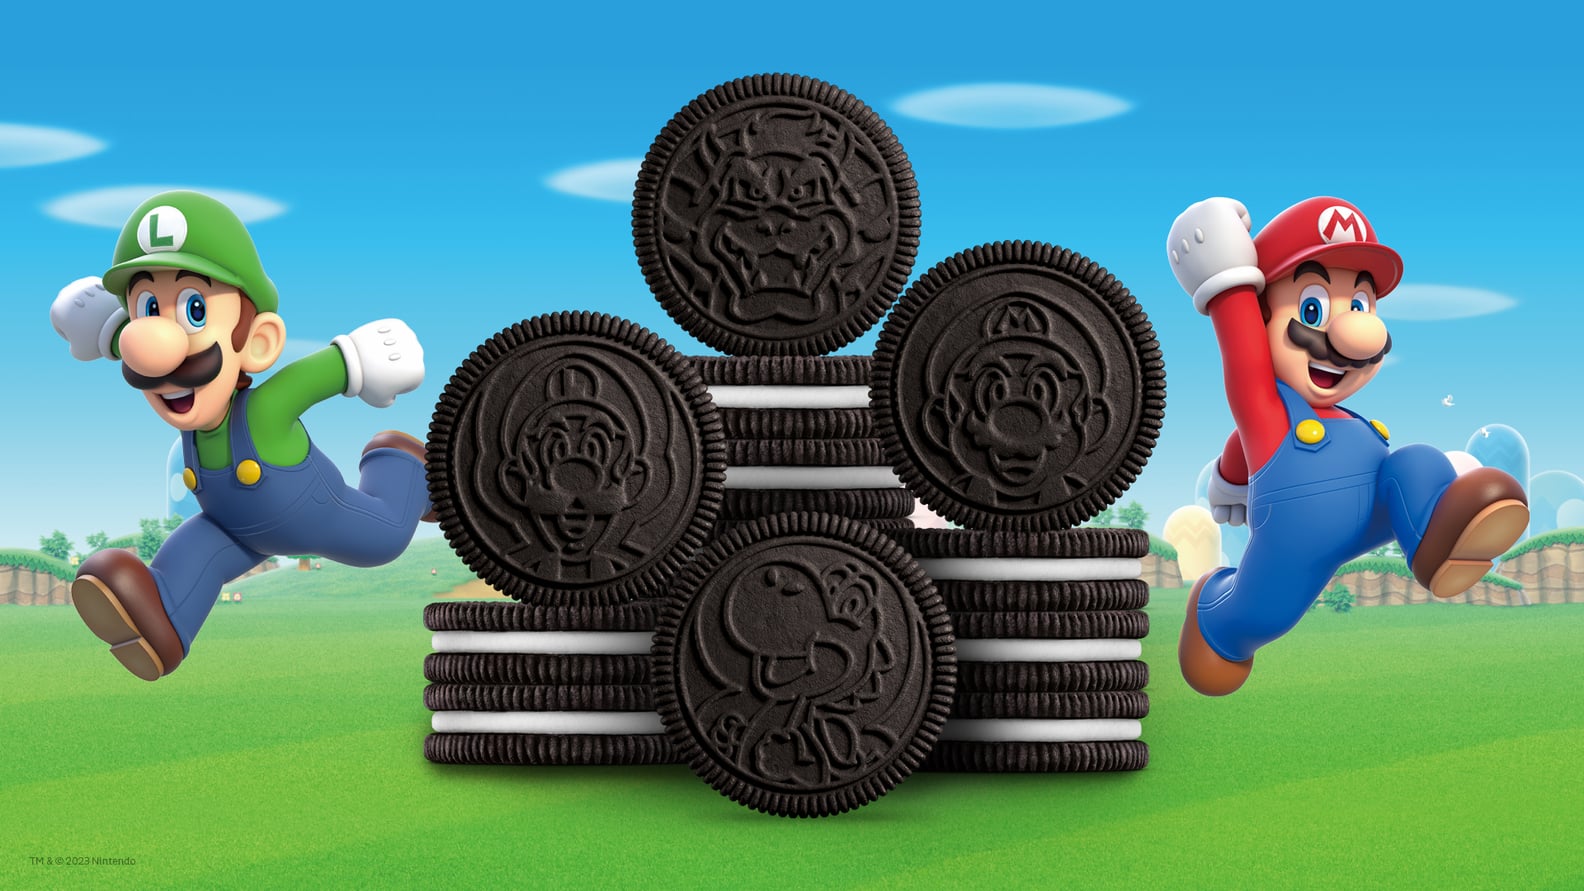 How to Collect All of the Super Mario Oreo Cookies | POPSUGAR Food